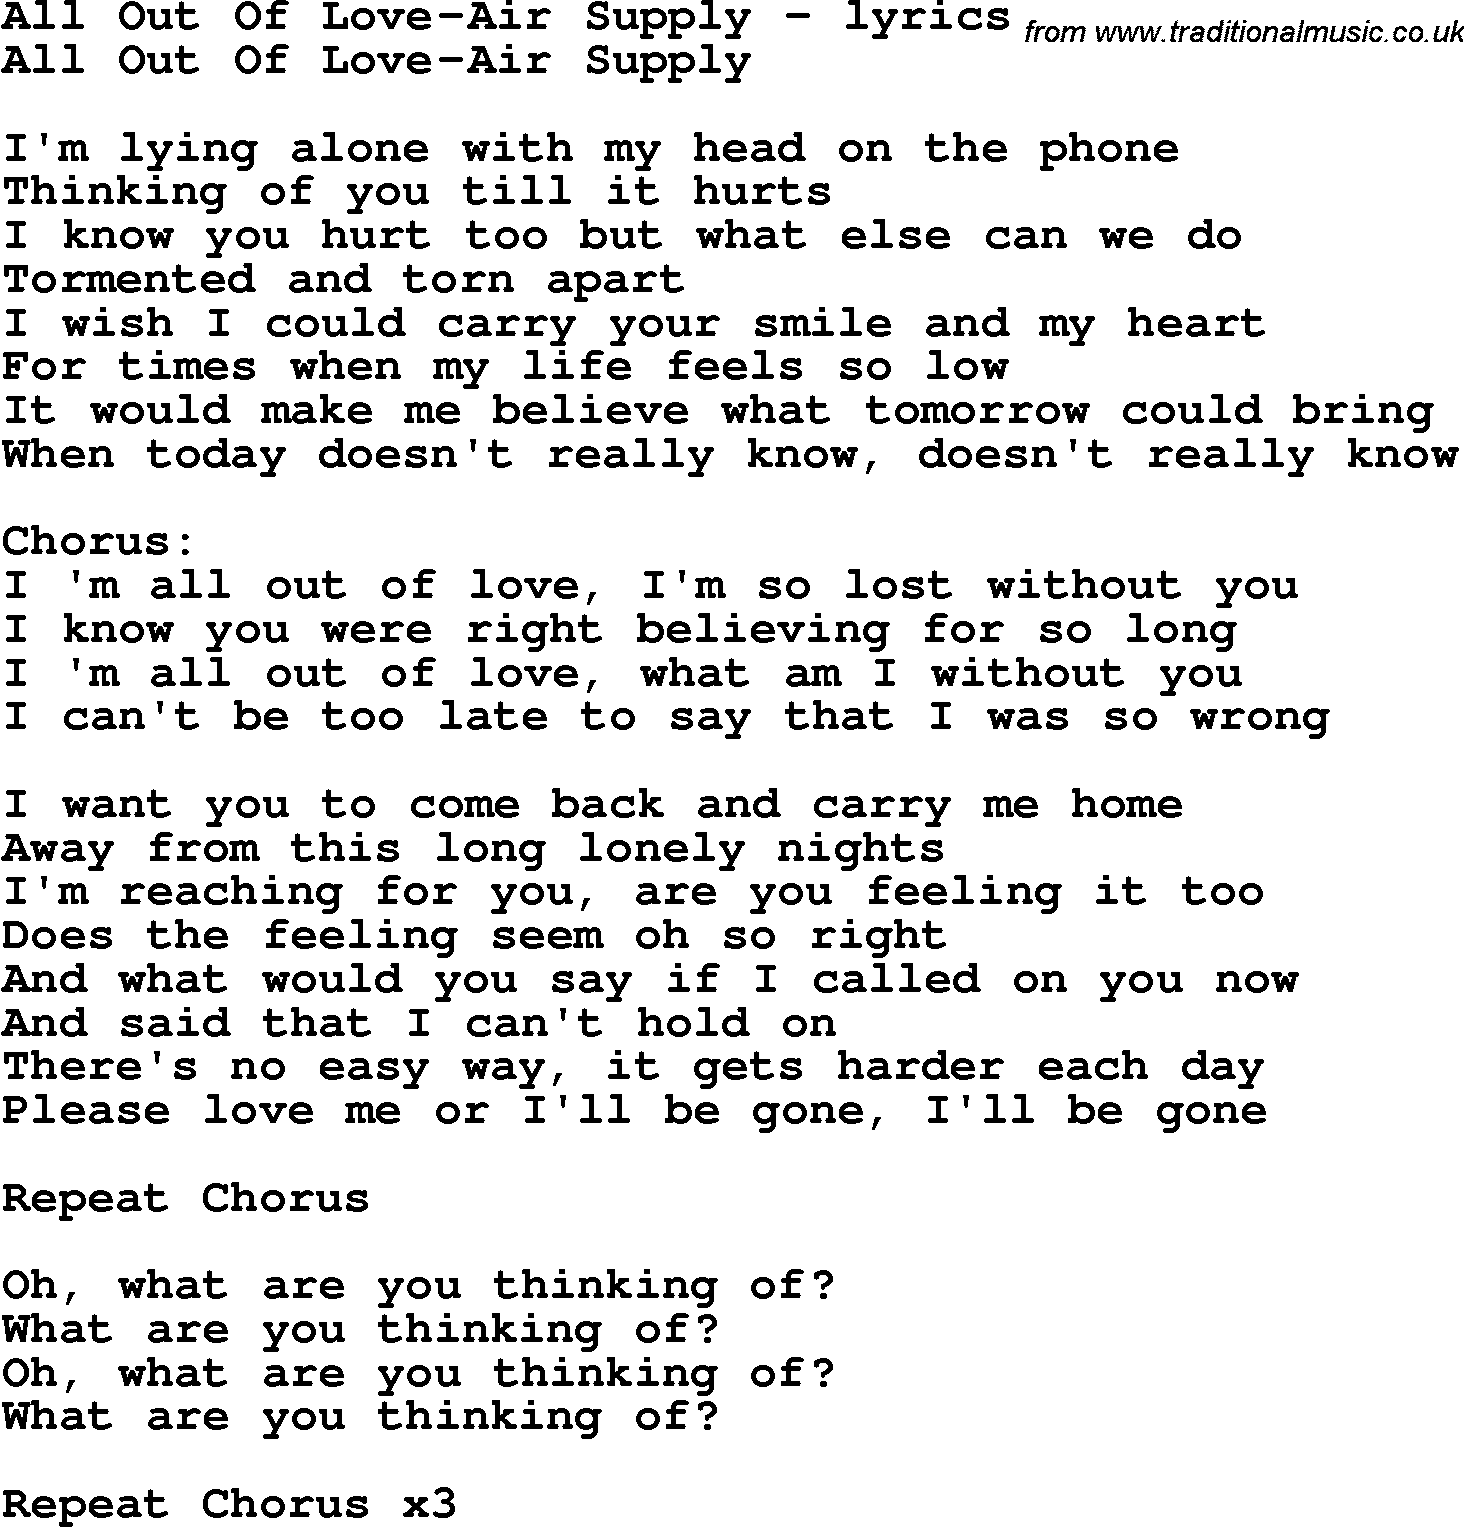 Love Song Lyrics for: All Out Of Love-Air Supply